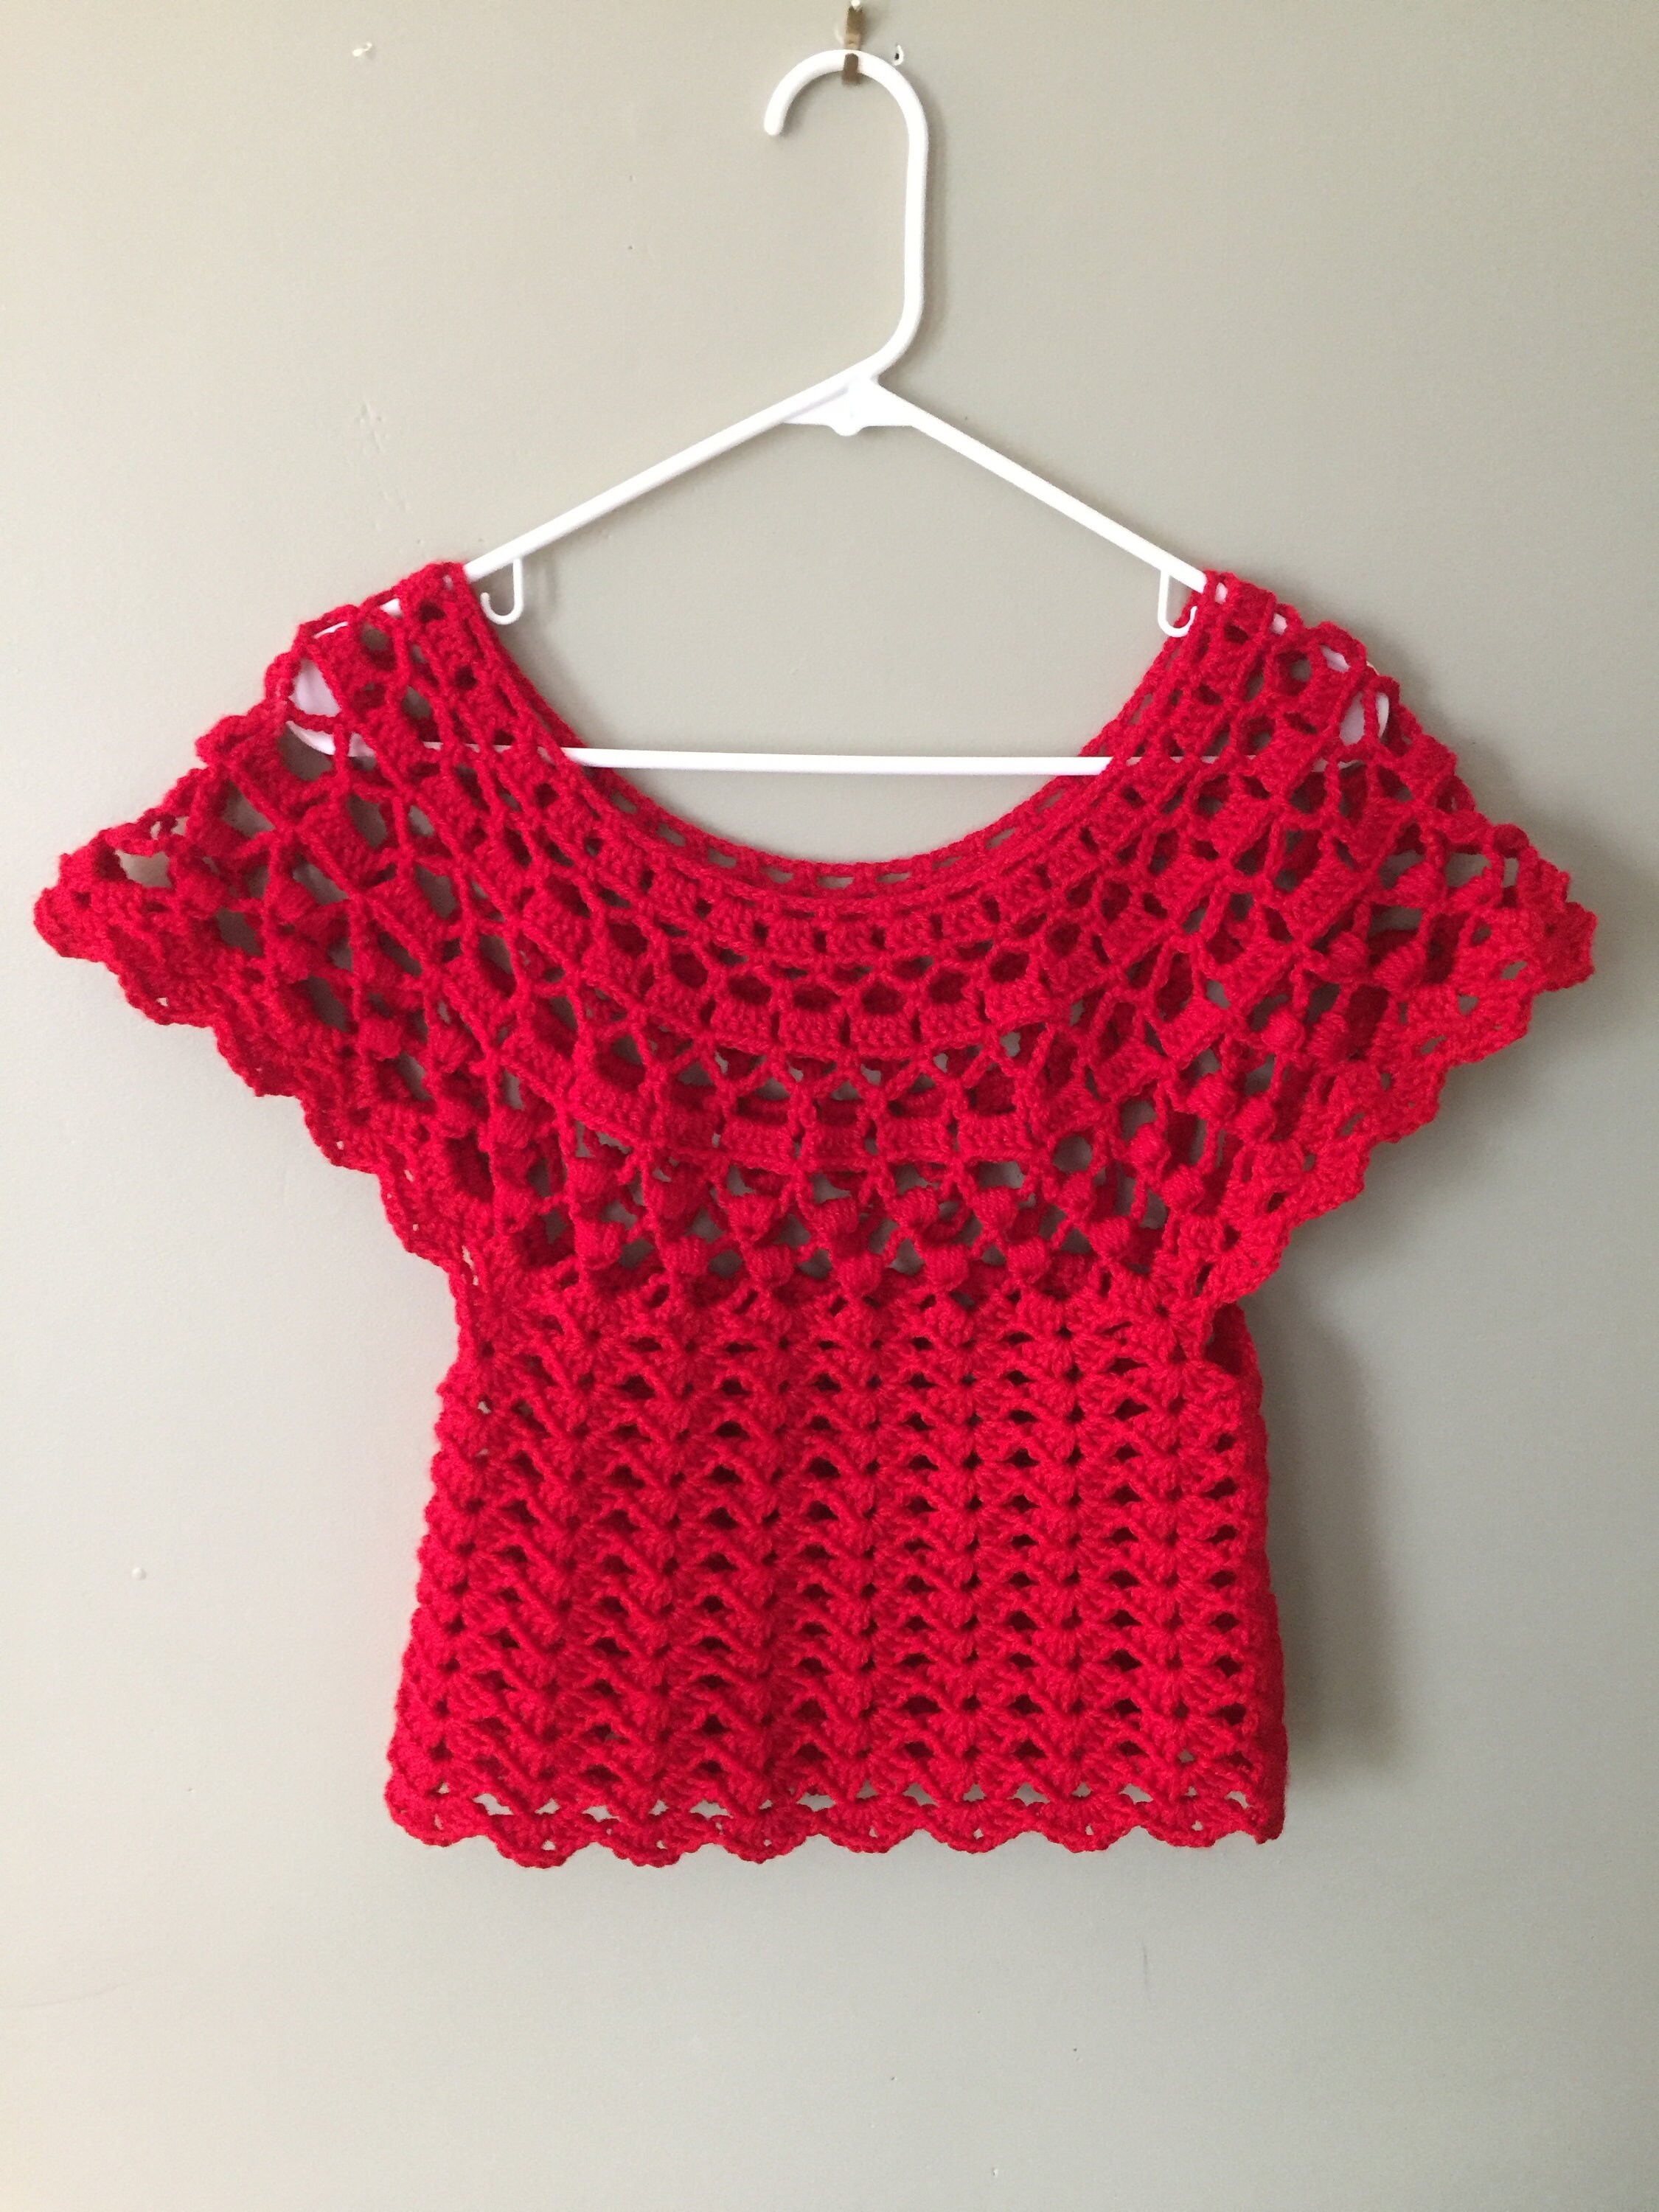 Crochet Red Lace Crop Top/ Summer Sleeveless Top With Decorative Yoke ...